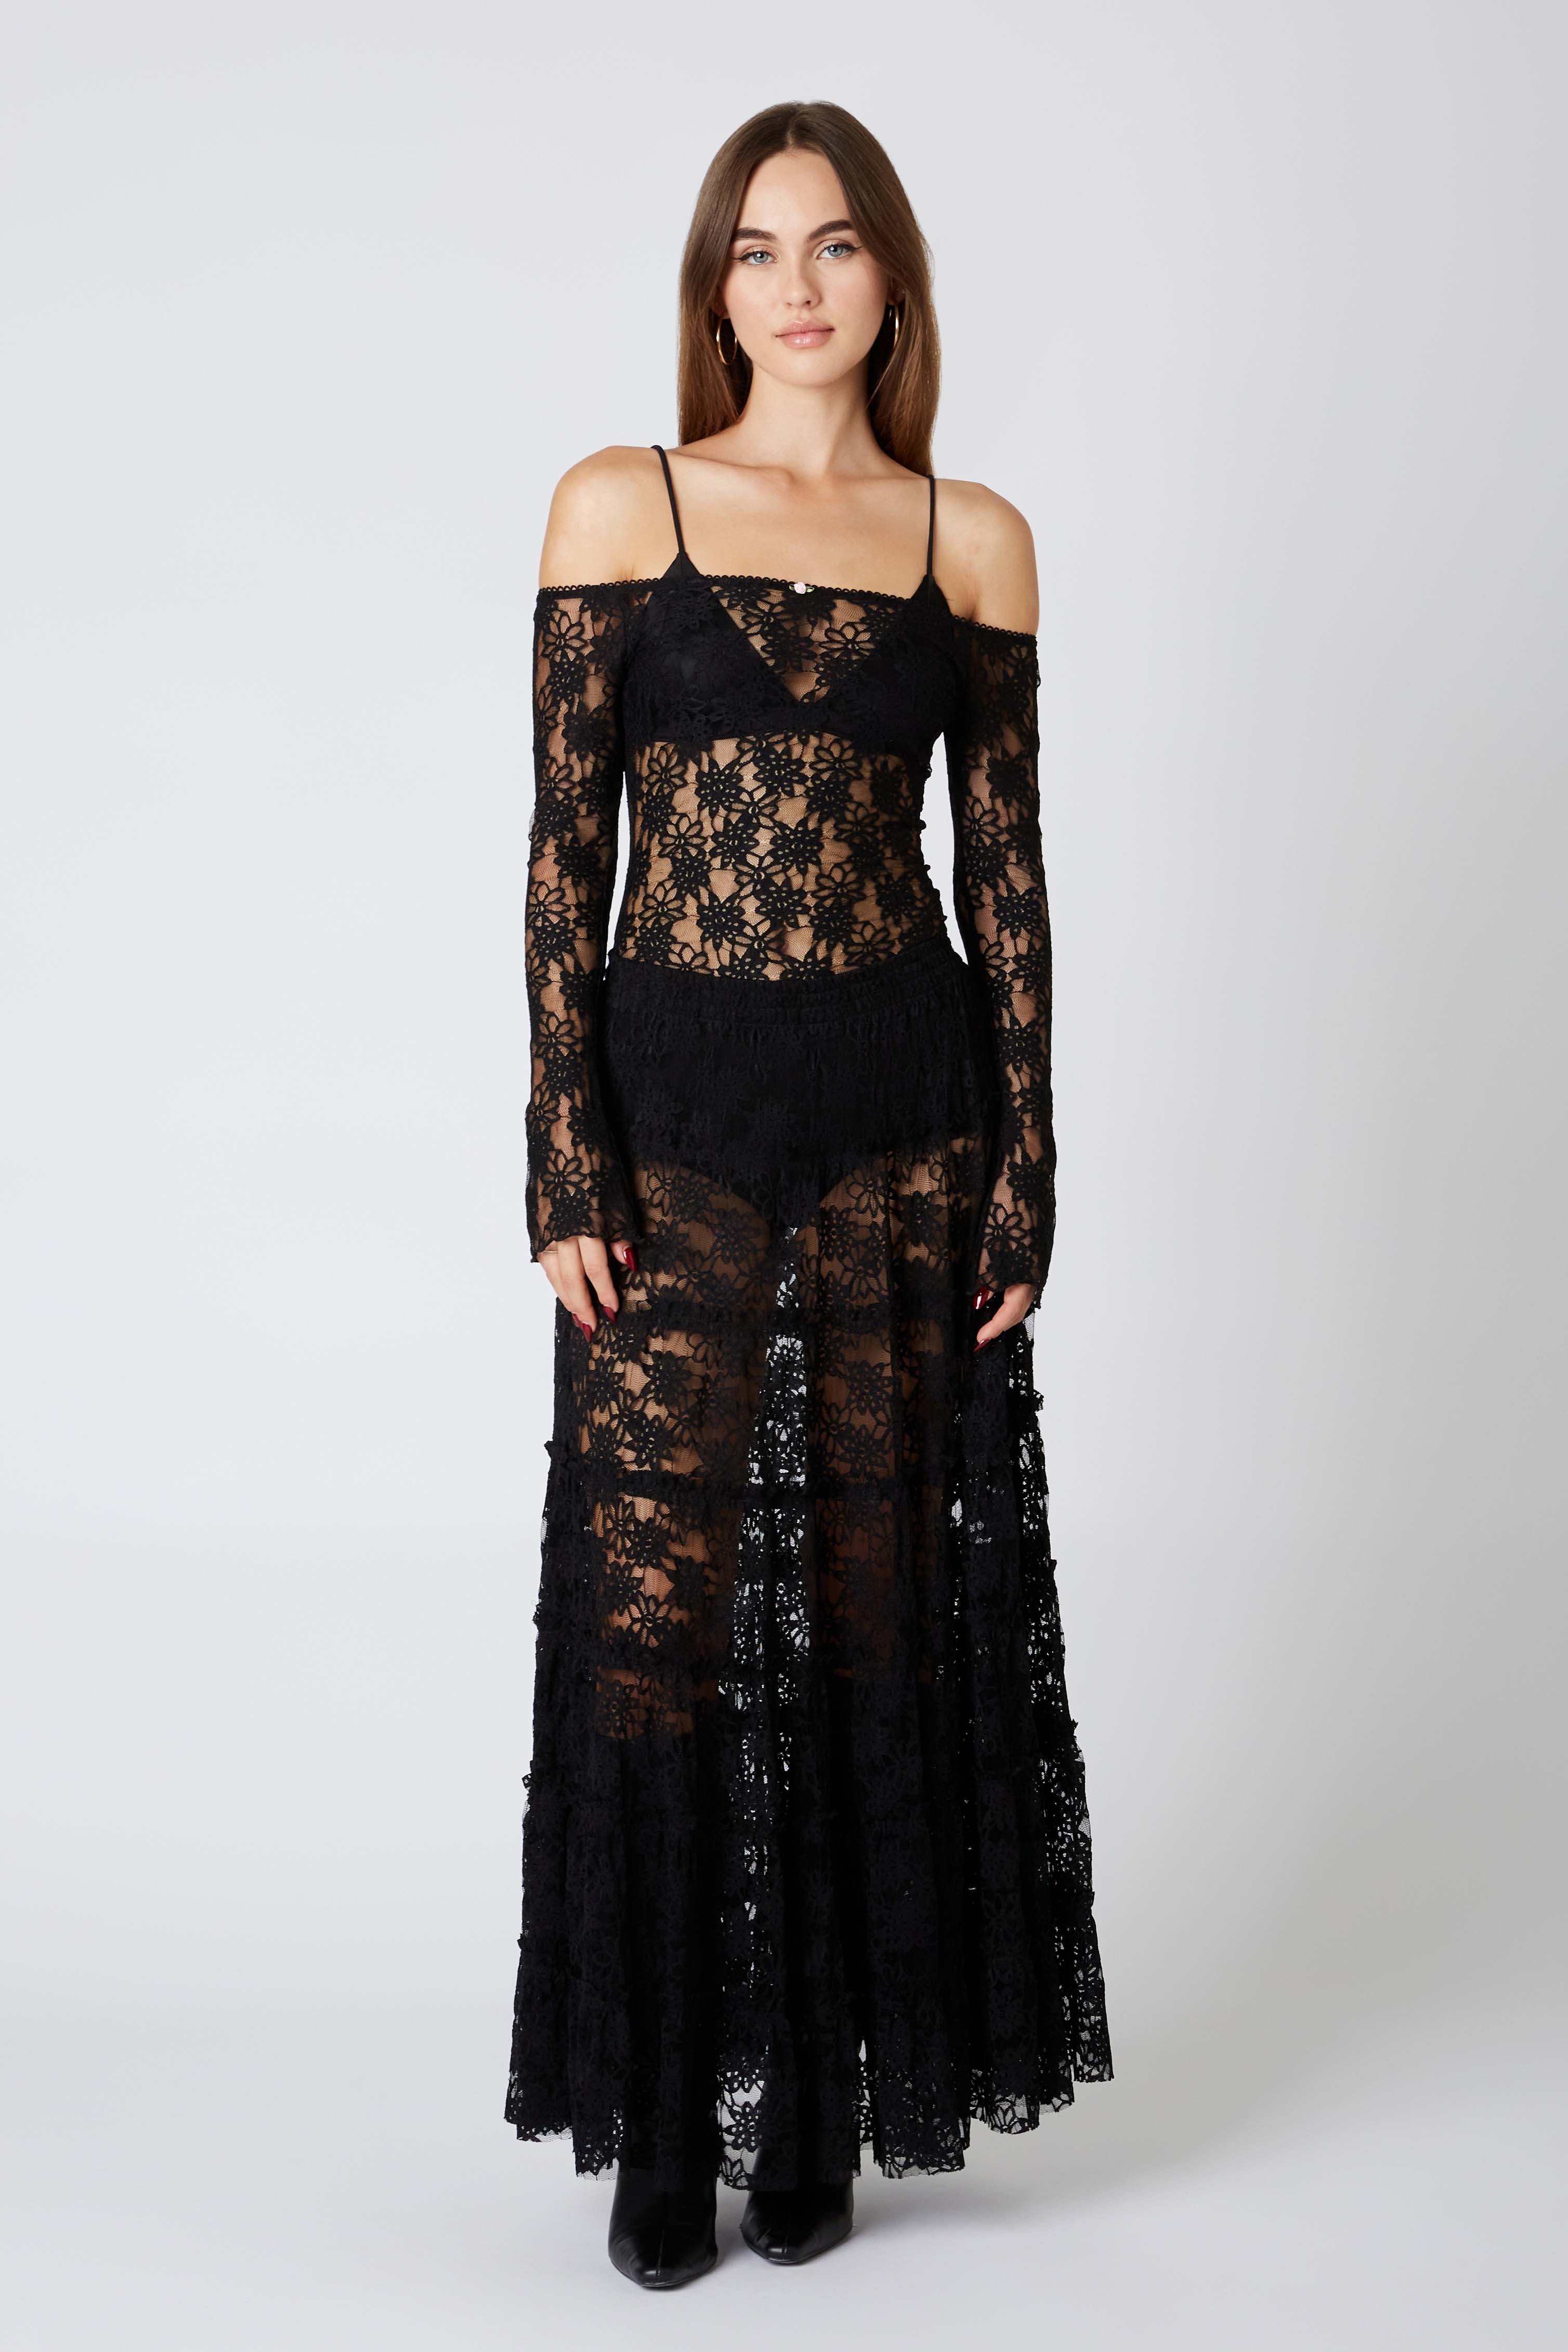 Tiered Floral Lace Maxi Skirt in Black Front View